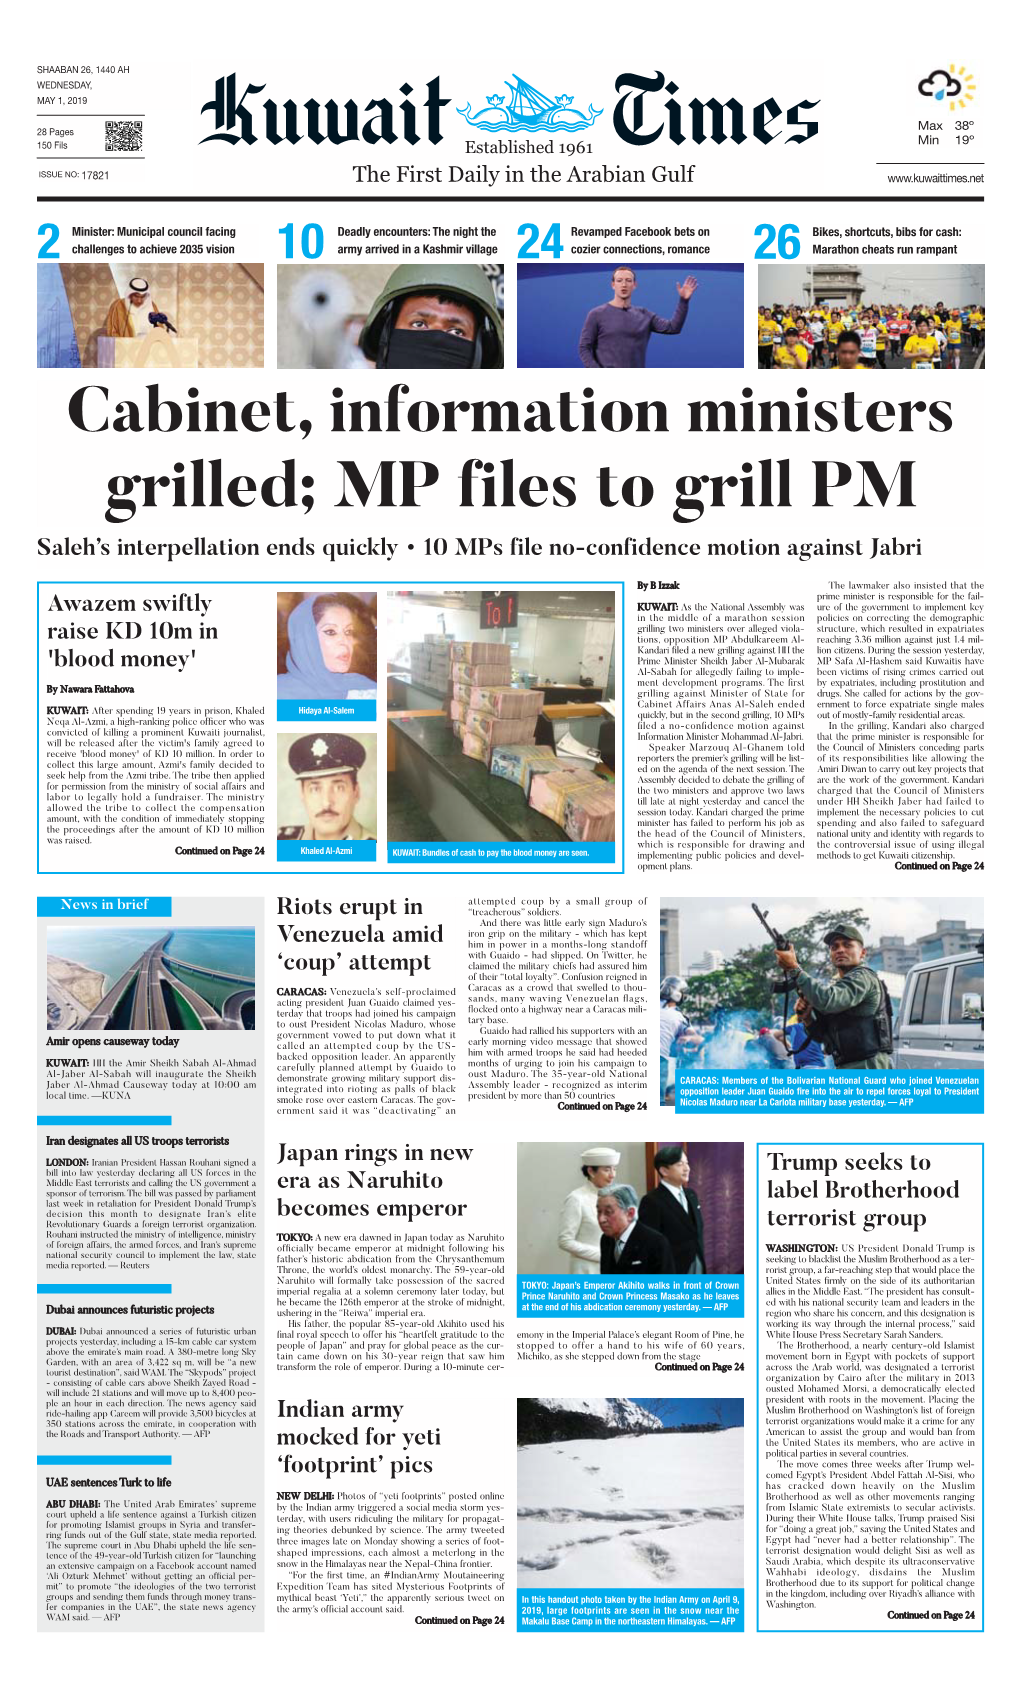 Cabinet, Information Ministers Grilled; MP Files to Grill PM Saleh’S Interpellation Ends Quickly • 10 Mps File No-Confidence Motion Against Jabri